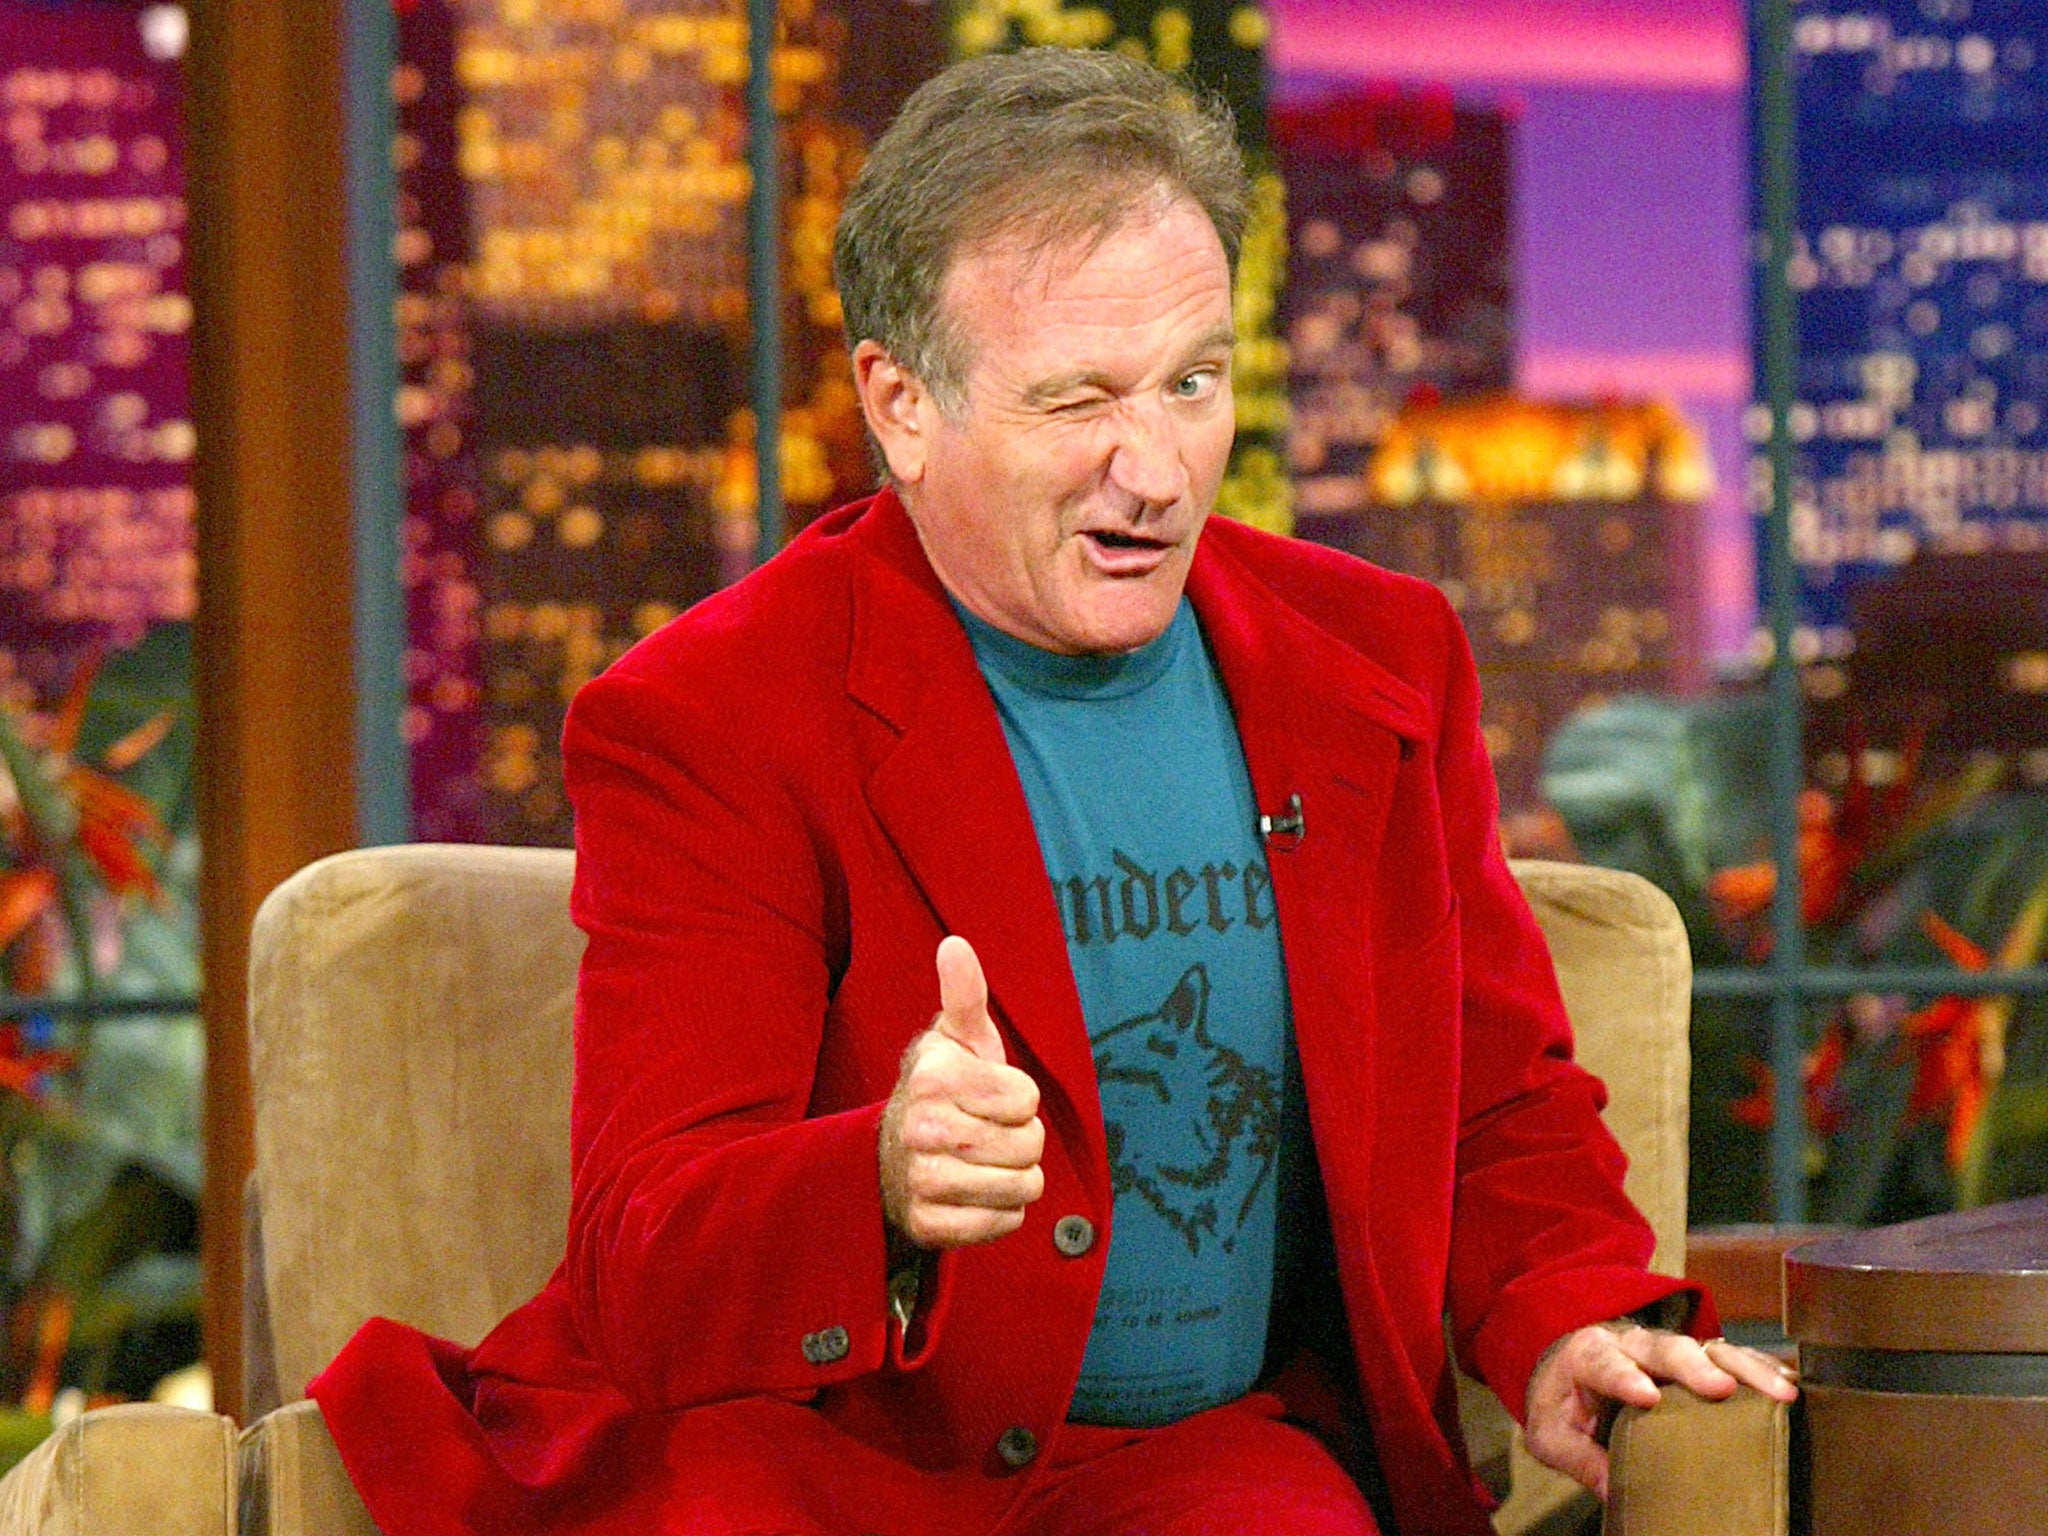 The death of the multi-talented Hollywood star Robin Williams has shocked legions of fans.